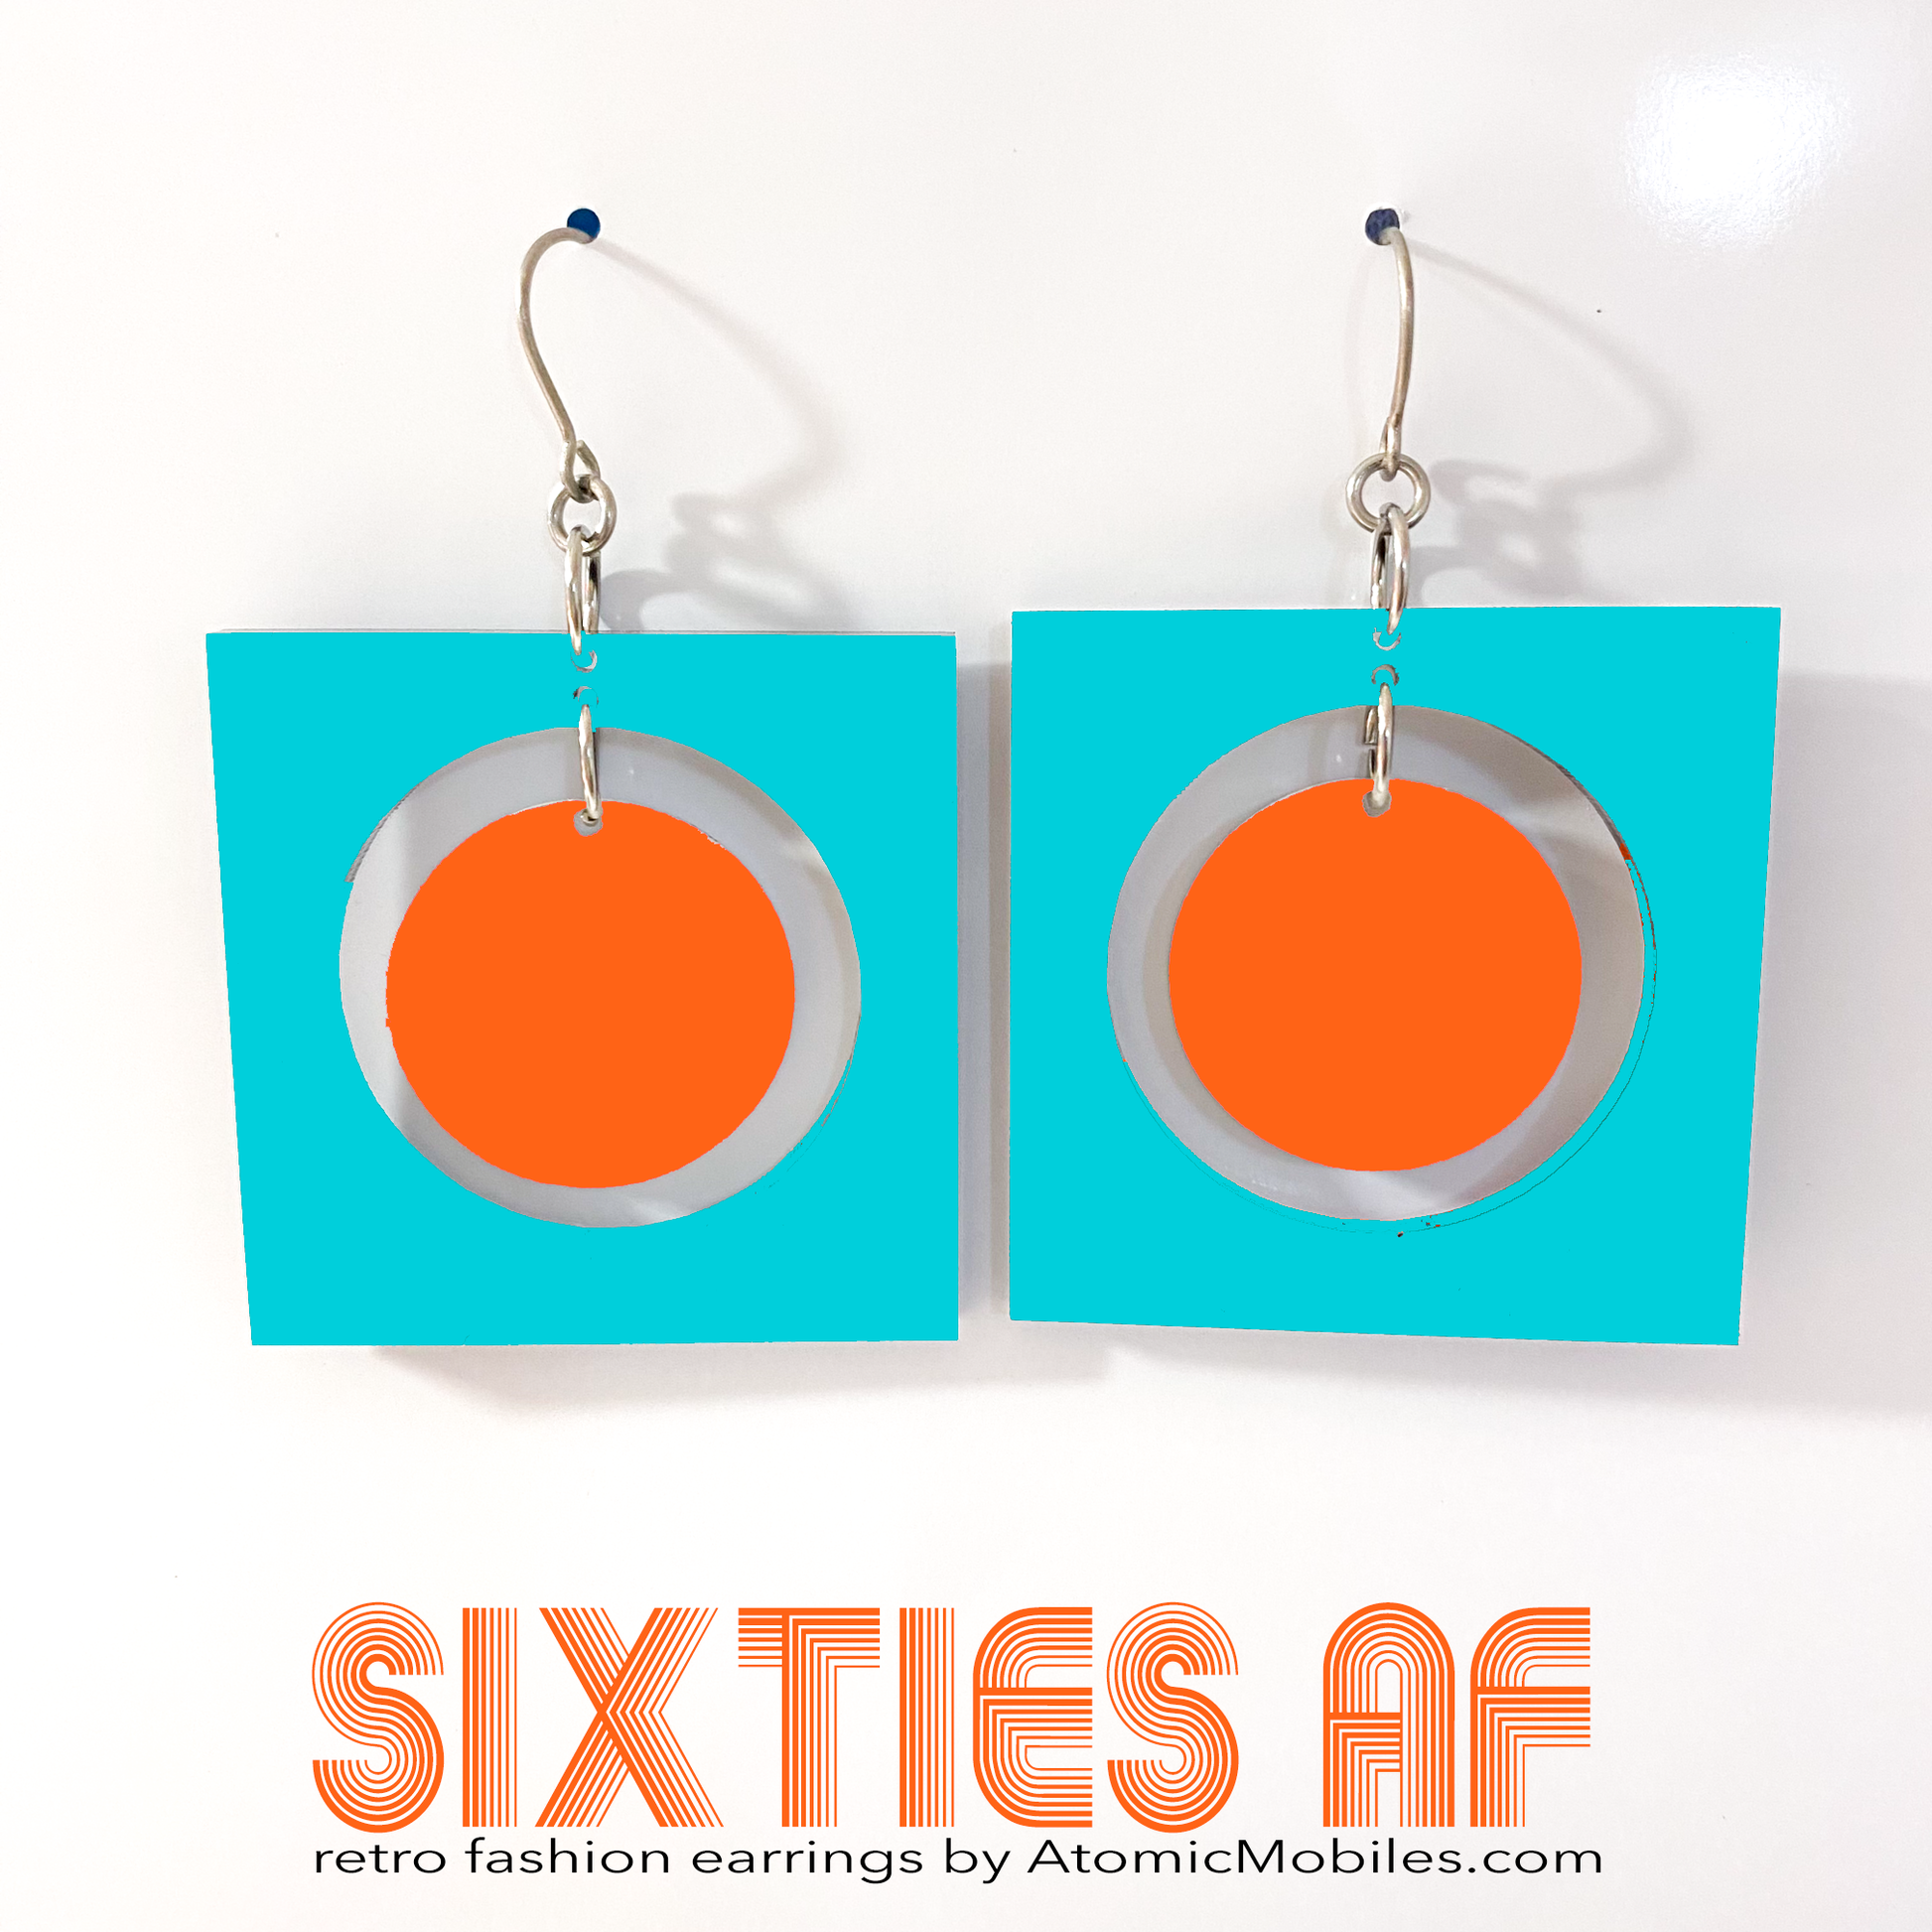 SIXTIES AF groovy retro fashion earrings inspired by the 1960s in aqua and orange - by AtomicMobiles.com